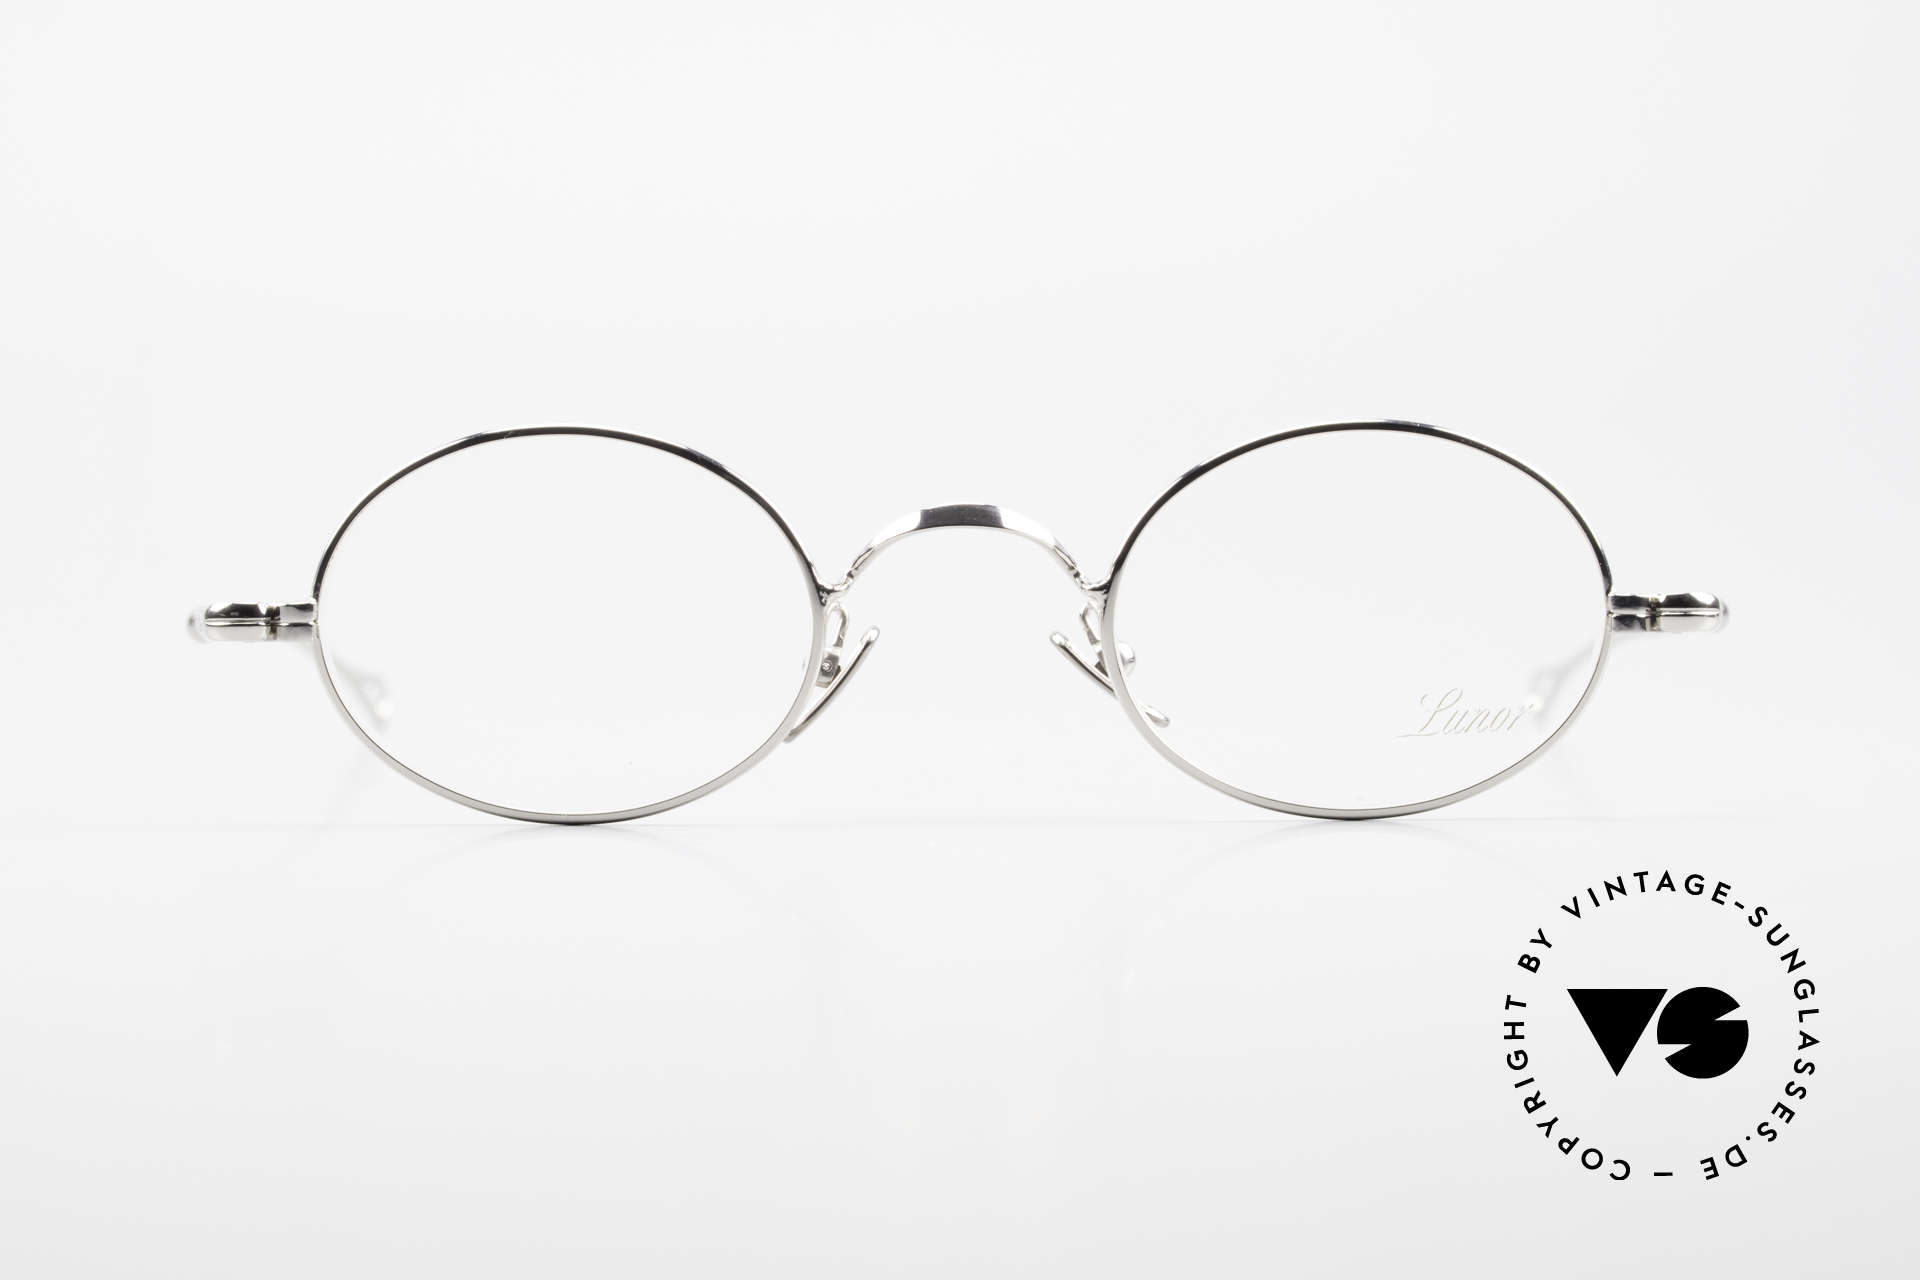 Lunor V 100 Oval Vintage Lunor Glasses, without ostentatious logos (but in a timeless elegance), Made for Men and Women